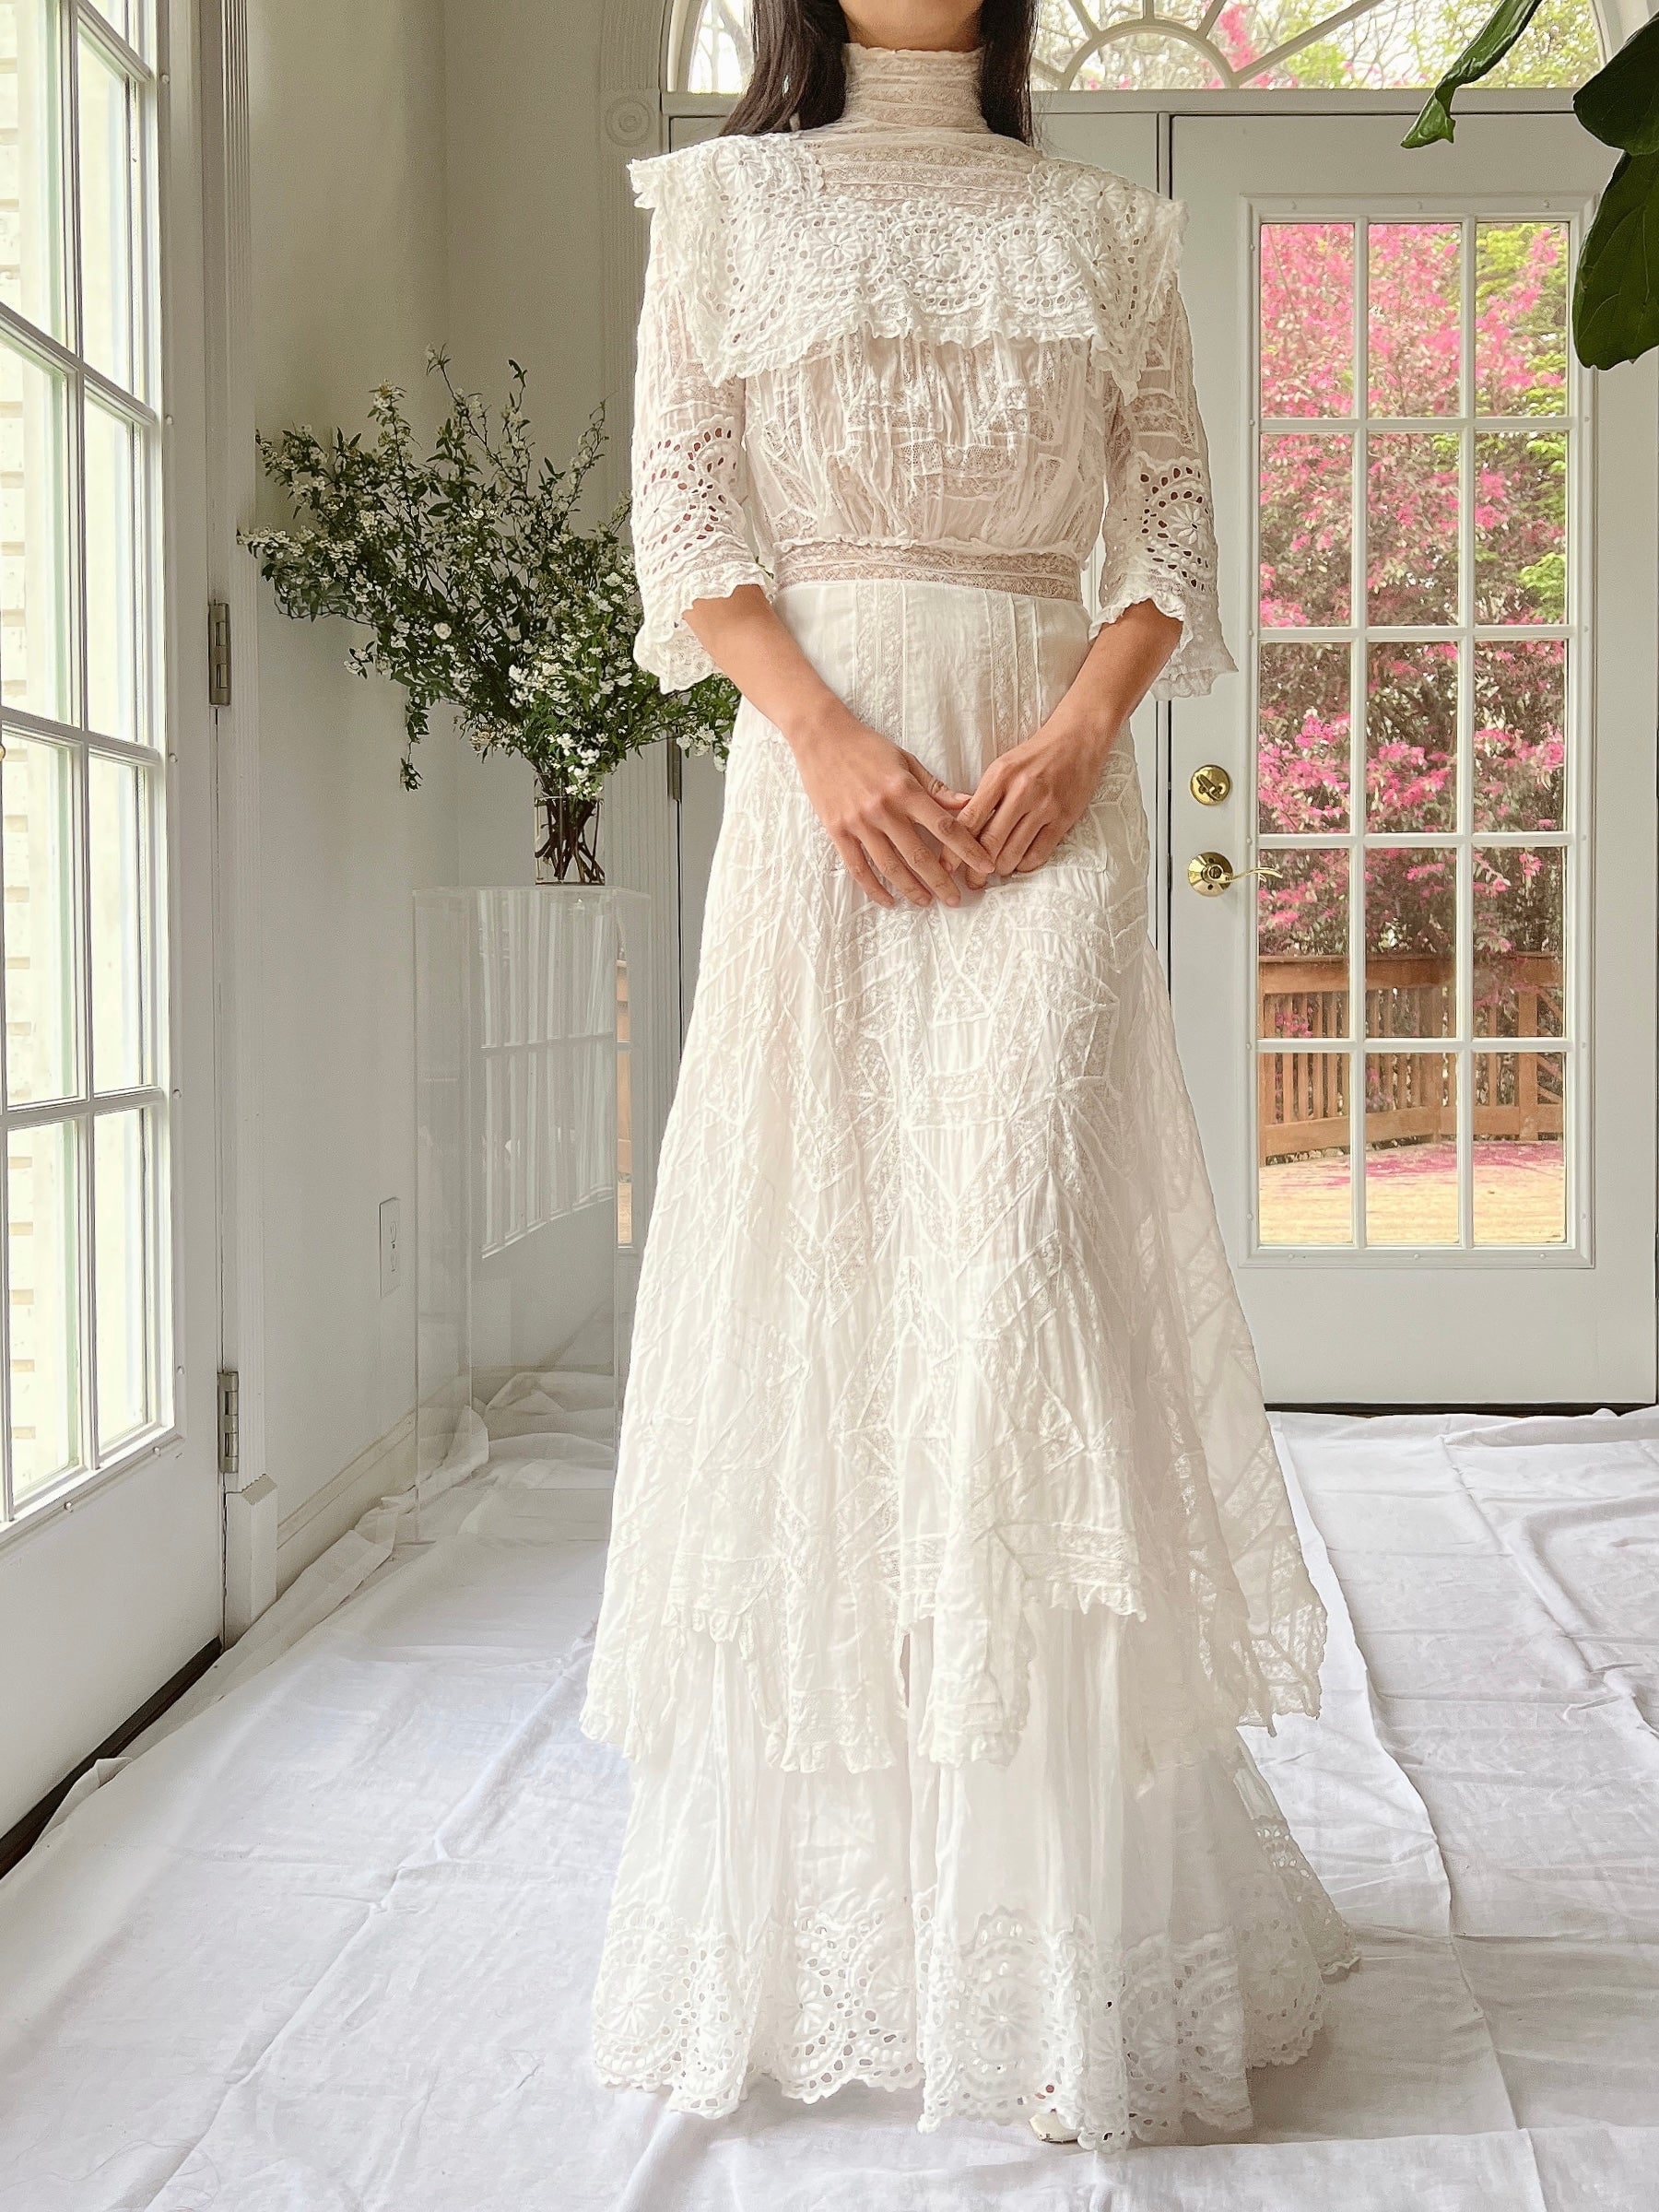 Antique High Neck Cotton and Lace Gown - XS